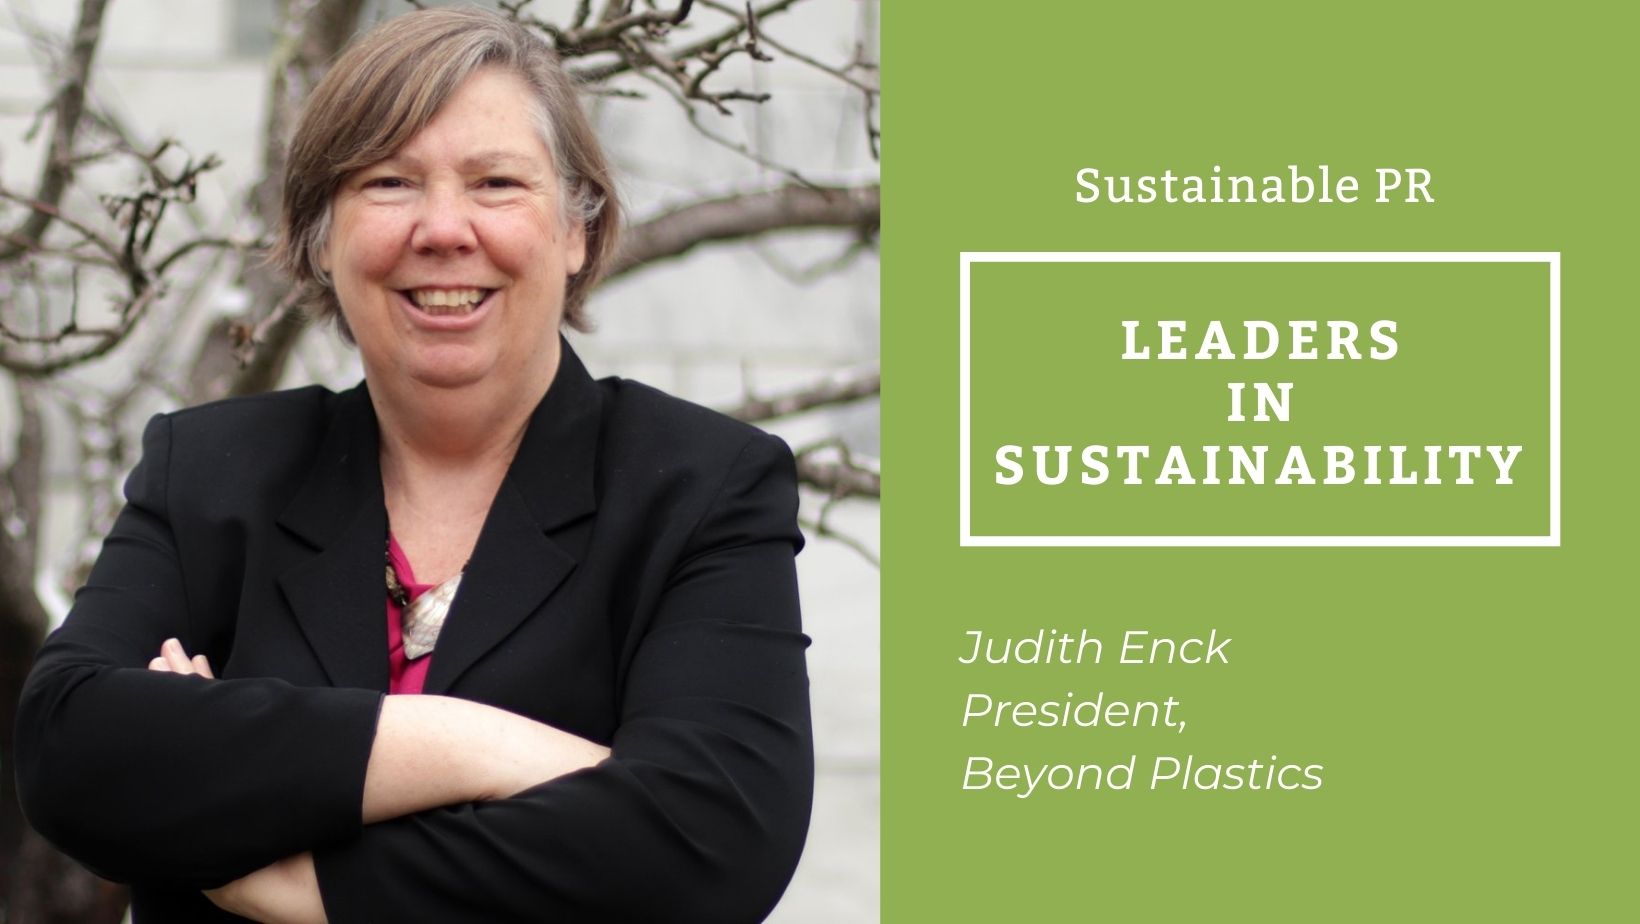 Leaders in Sustainability: A conversation about plastics with Judith Enck